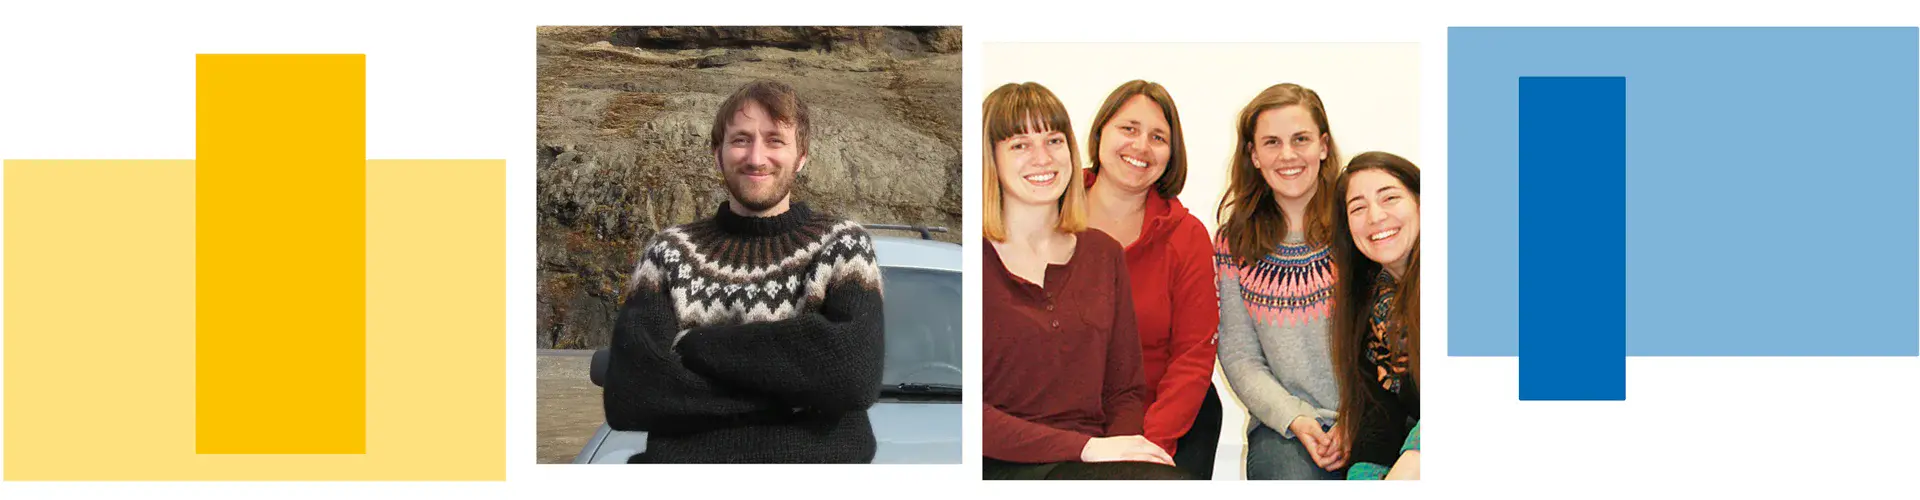 Winners of the EGU Public Engagement Grants 2019; Philip Heron (left) and Romana Hödl, Katrin Attermeyer, Laura E. Coulson, Astrid Harjung (right)